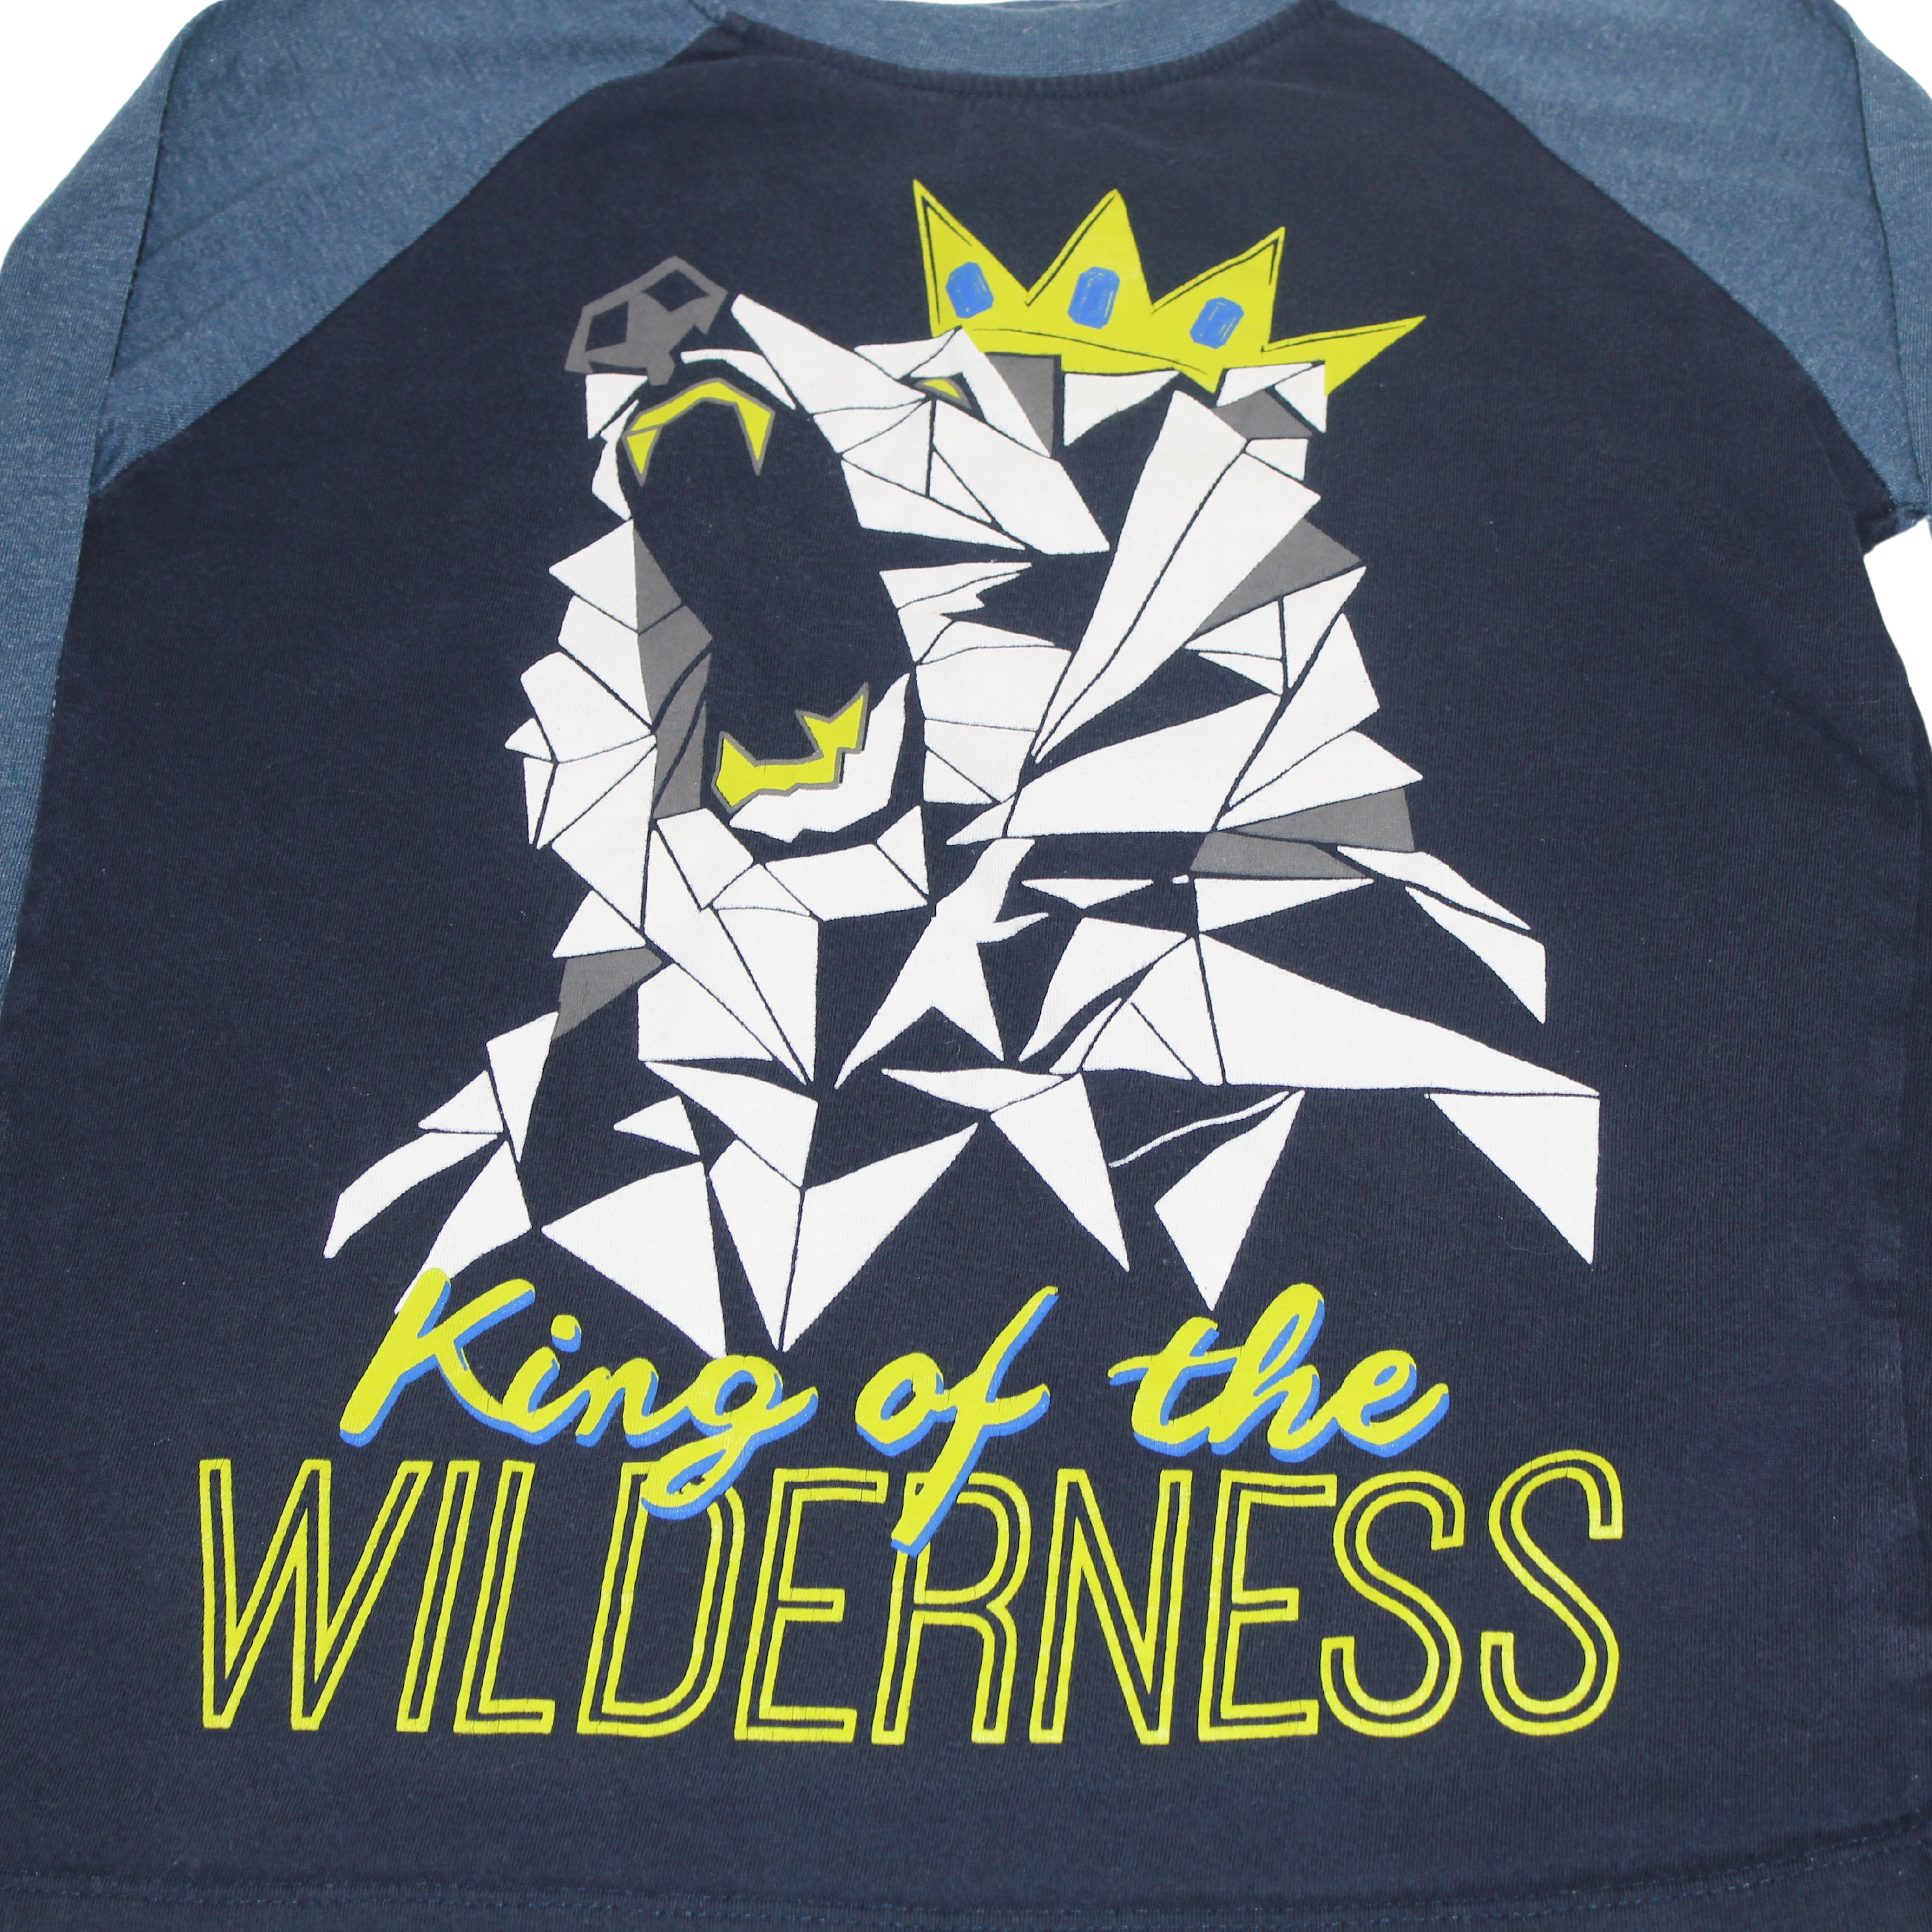 King of the Wilderness Long Sleeved Top